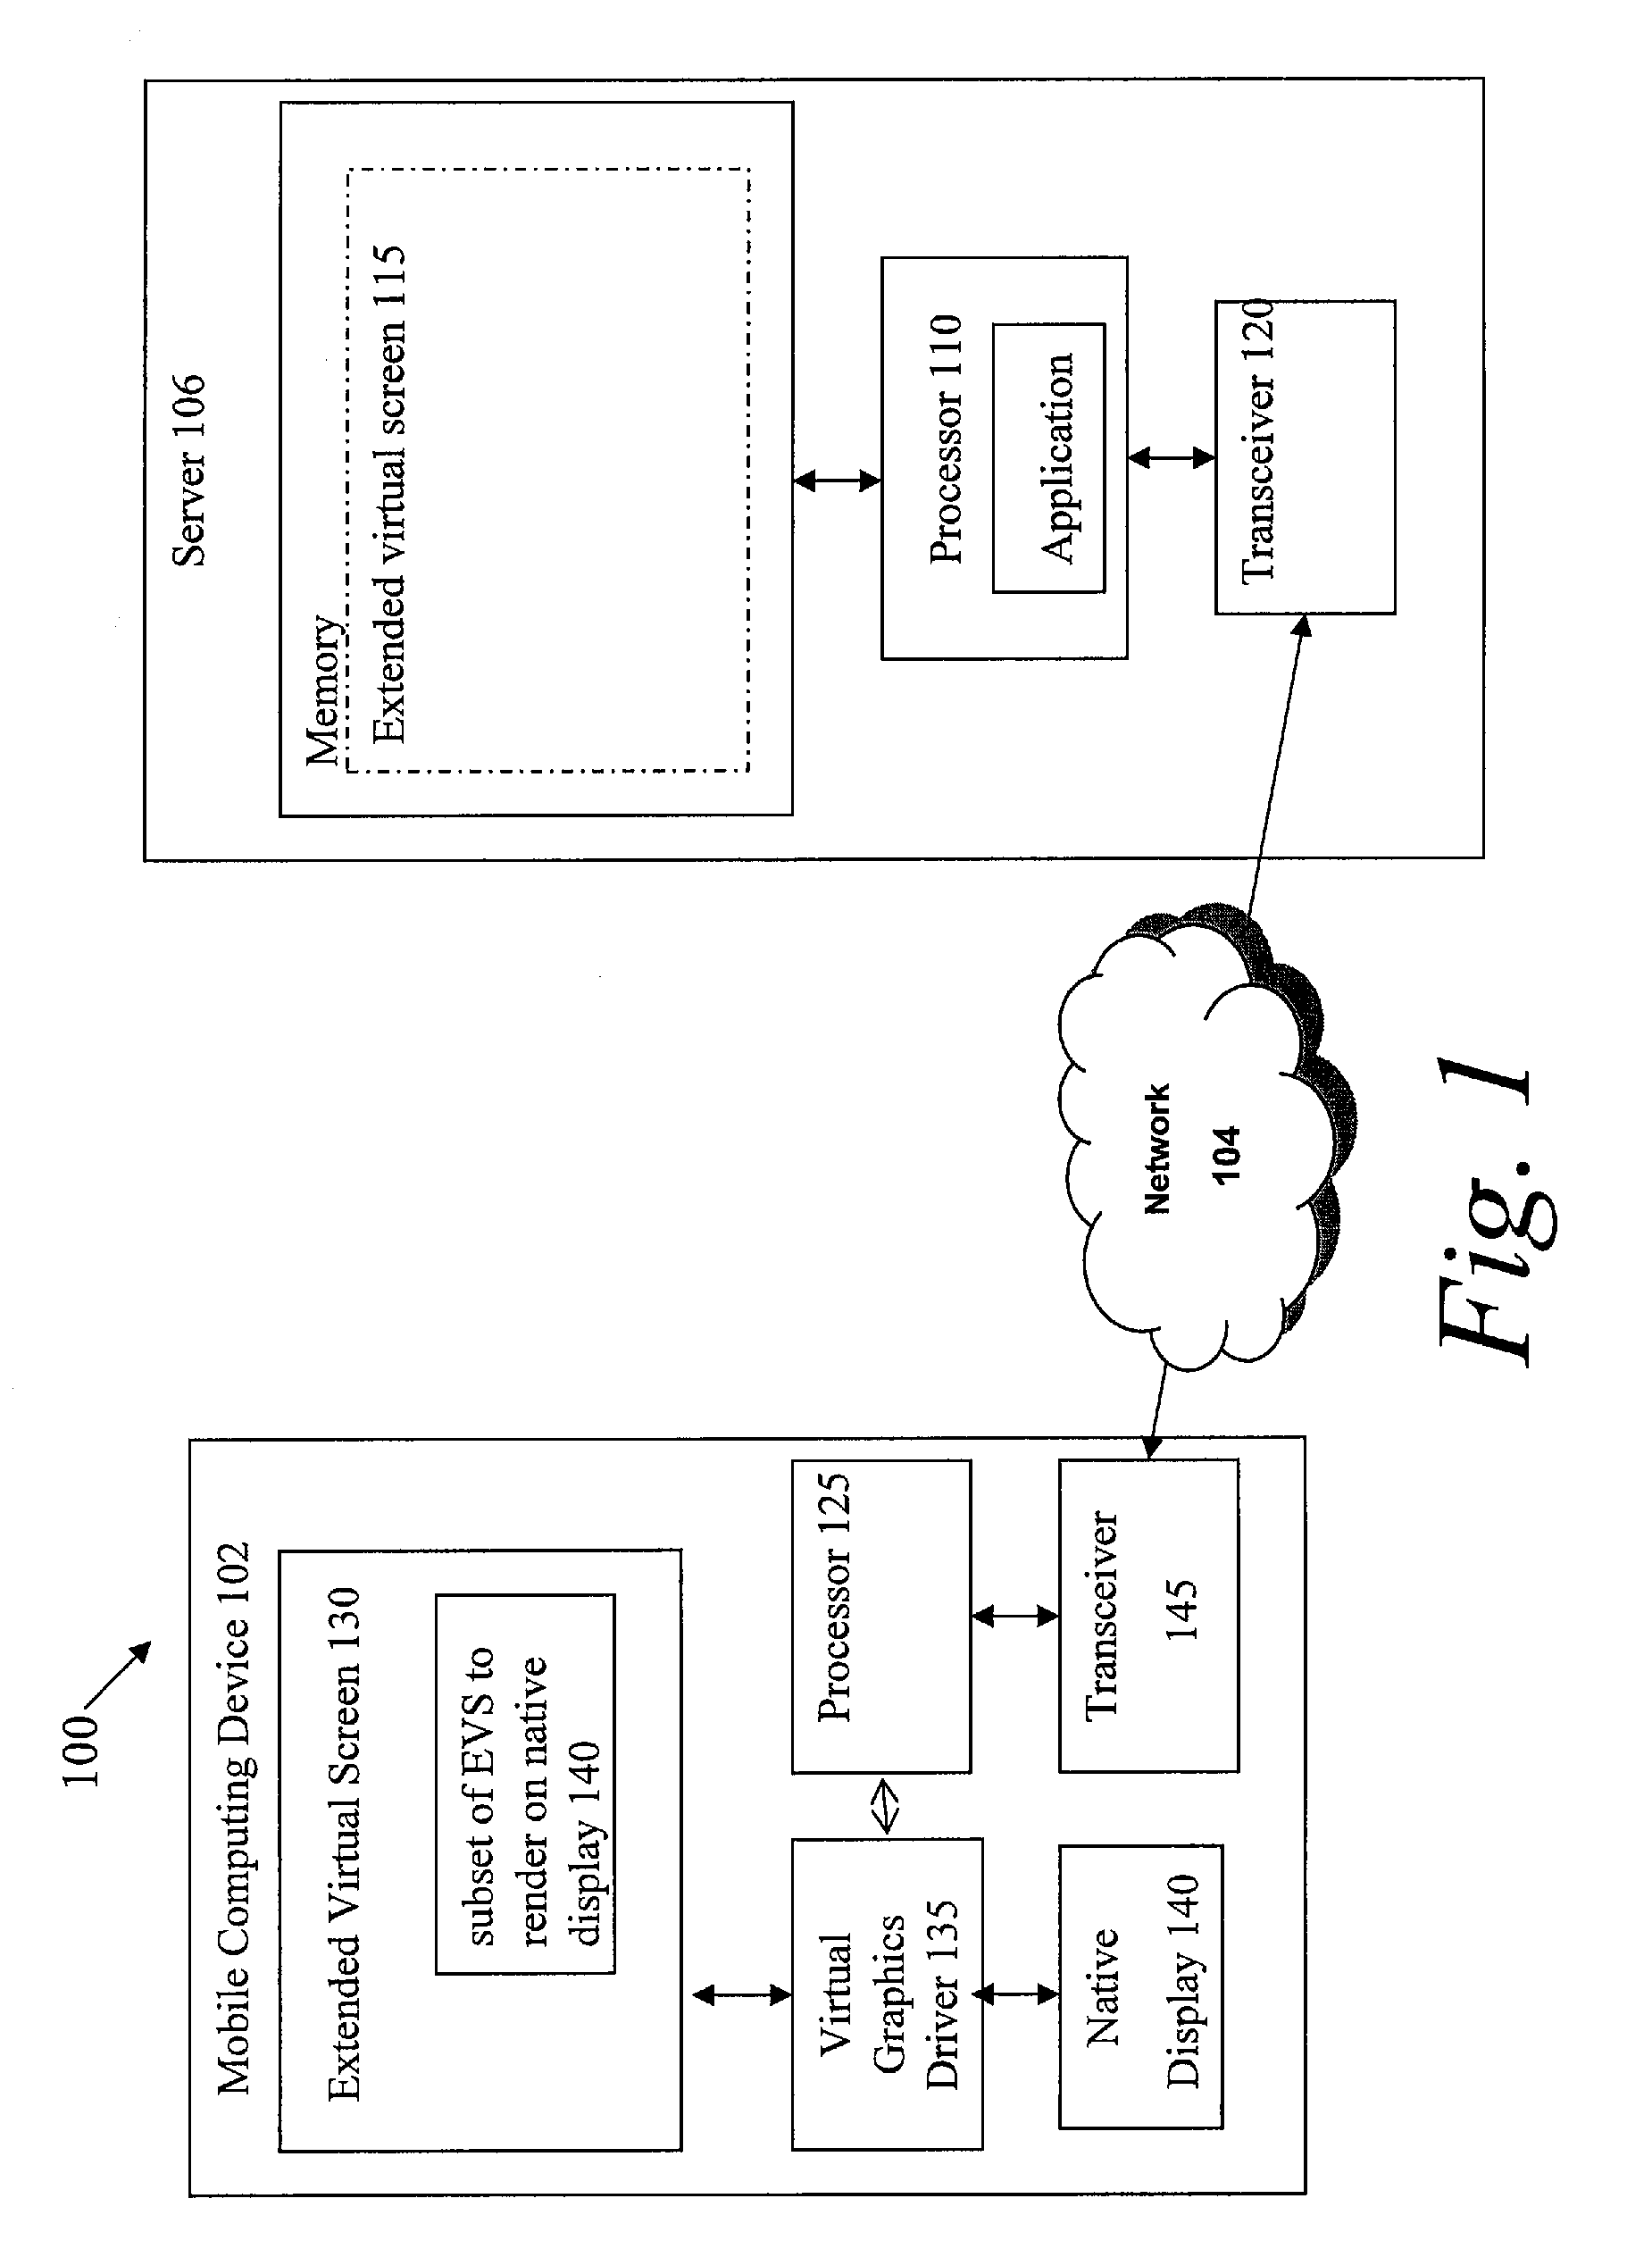 Panning a native display on a mobile computing device to a window, interpreting a gesture-based instruction to scroll contents of the window, and wrapping text on the window